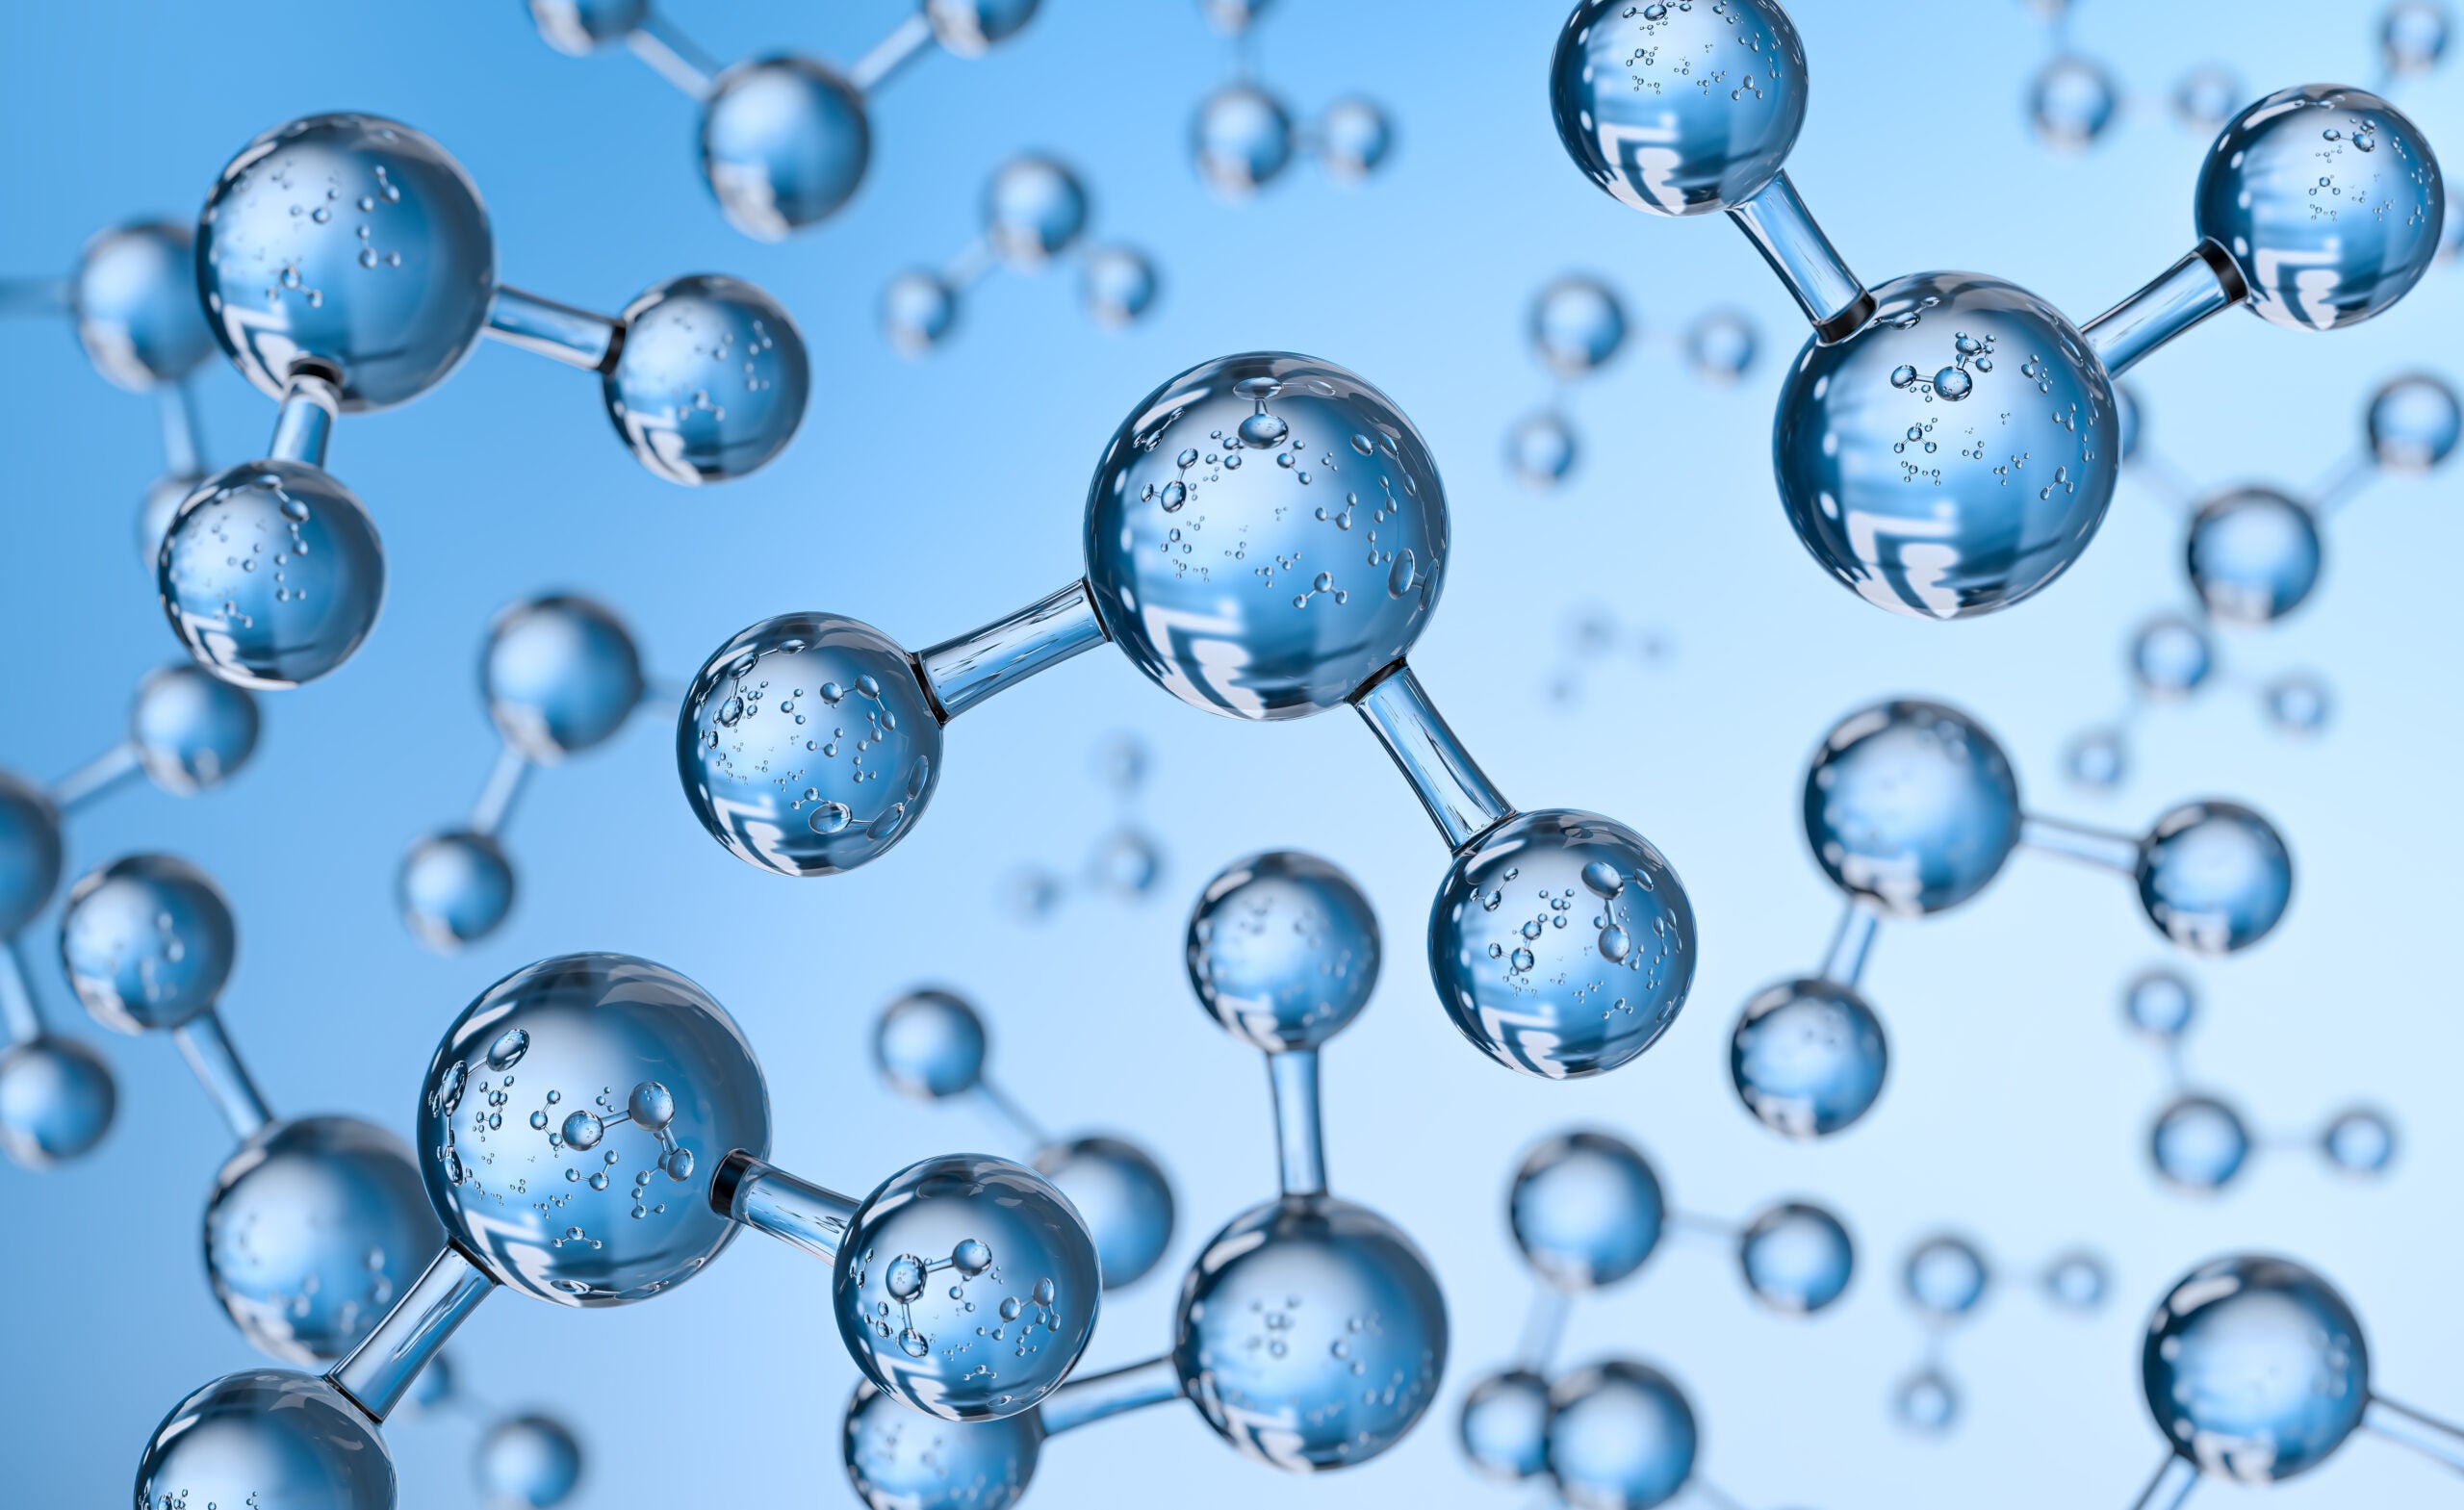 Hyaluronic Acid 101: The Good, The Bad and The Ugly